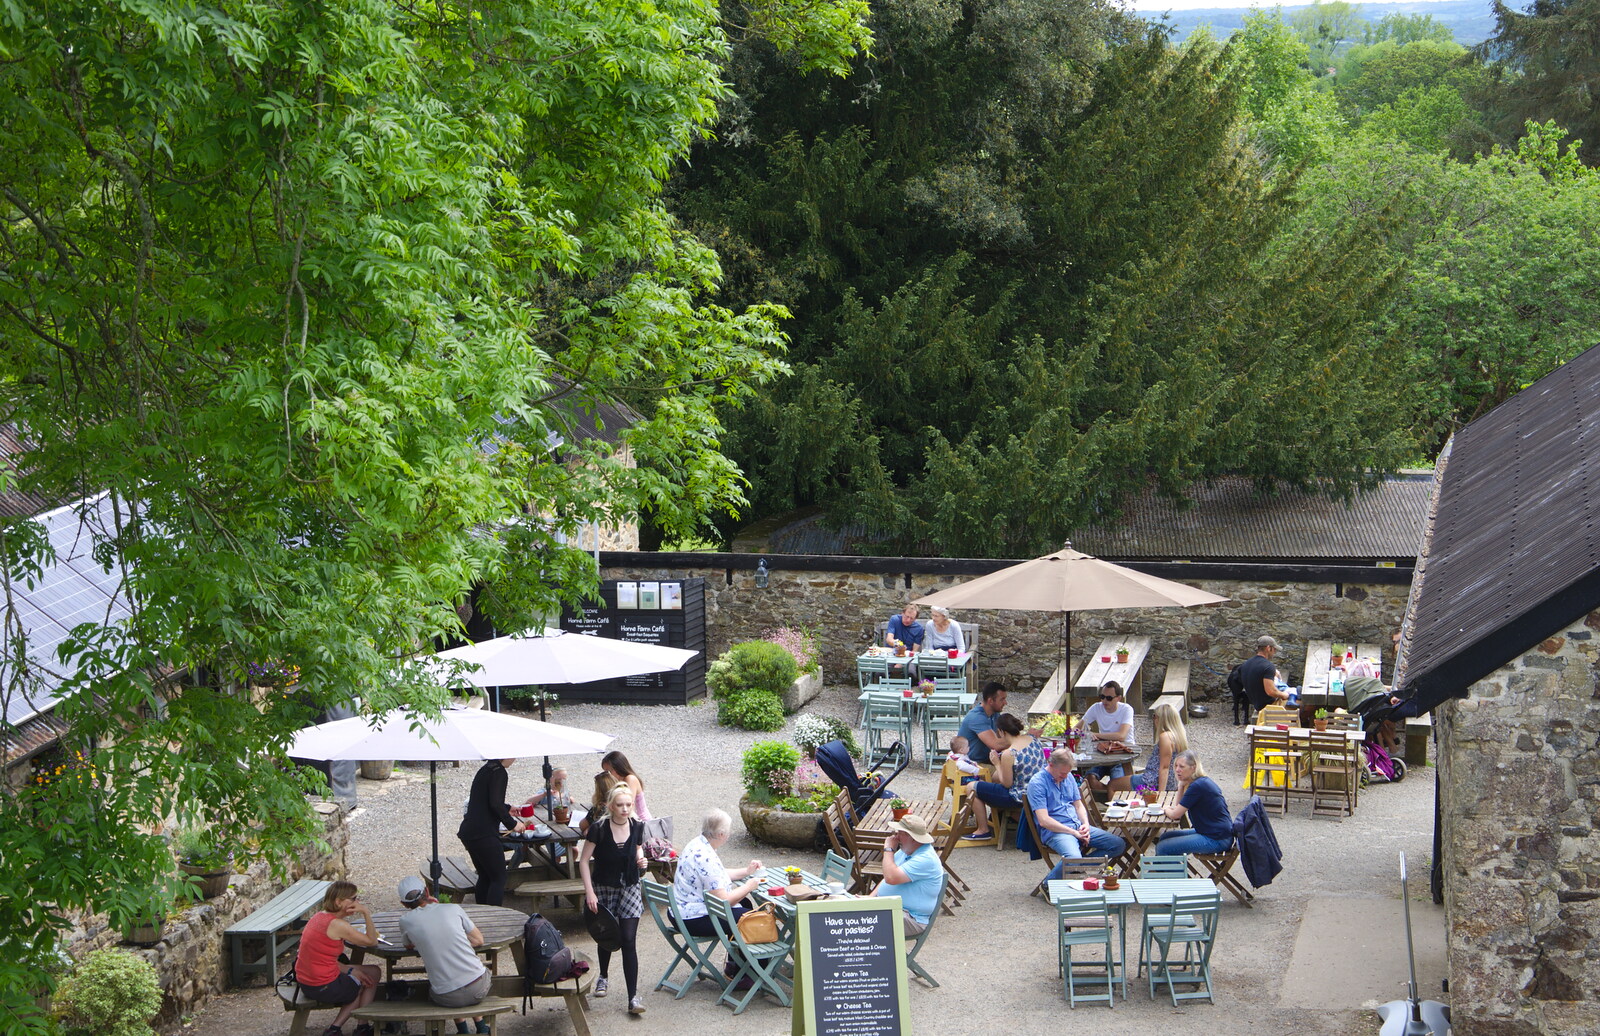 A view of the café from Chagford Lido and a Trip to Parke, Bovey Tracey, Devon - 25th May 2019